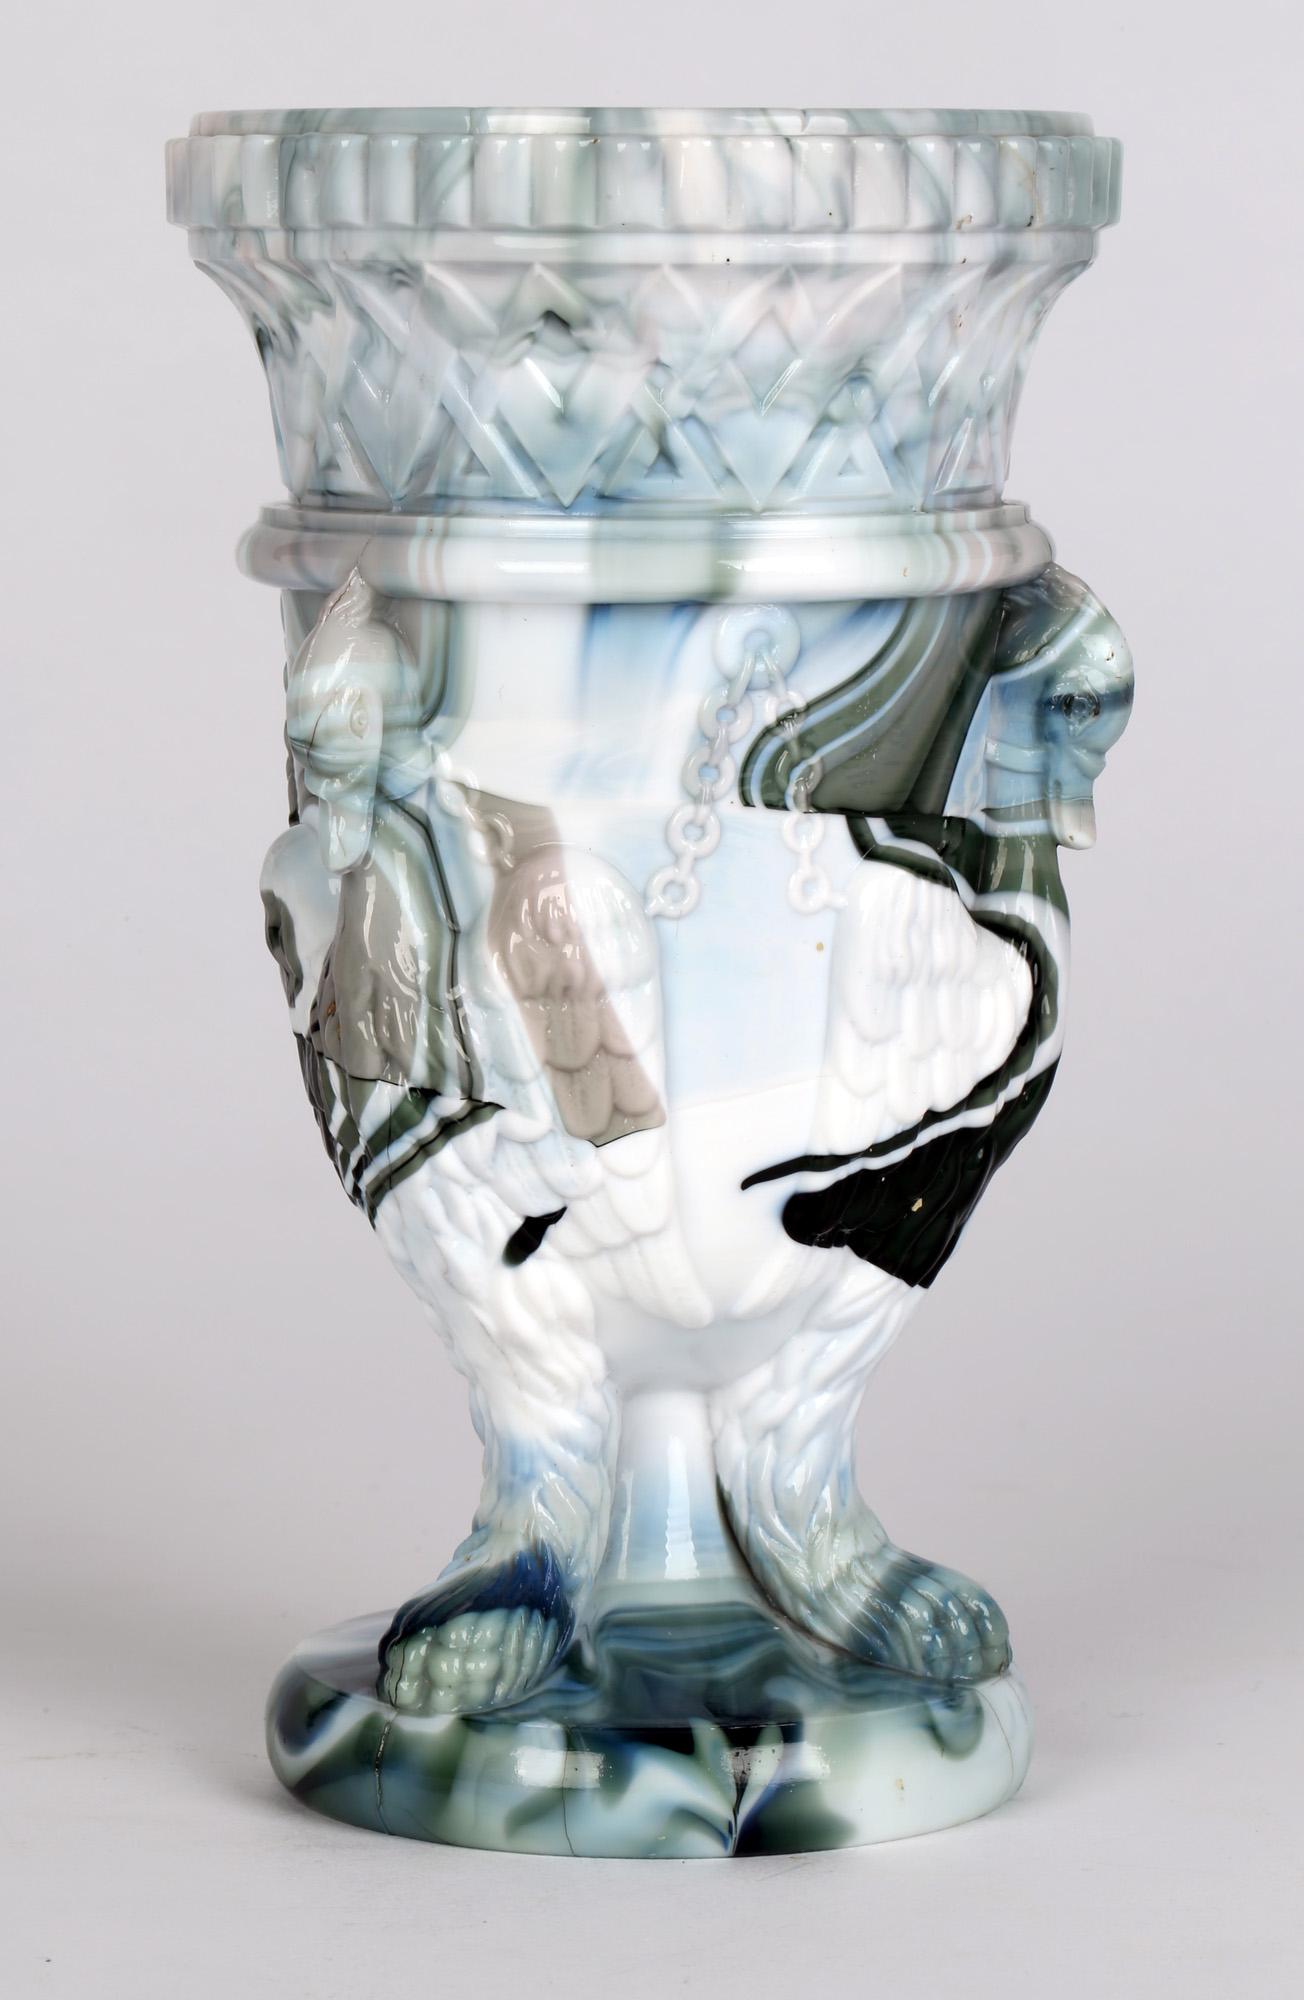 A superb quality Sowerby turquoise green, blue and white marbled slag glass vase molded with three chained swans with lion paws dating from around 1880. The vase is crisply molded with excellent detail in muted and bold colors. Often referred to as